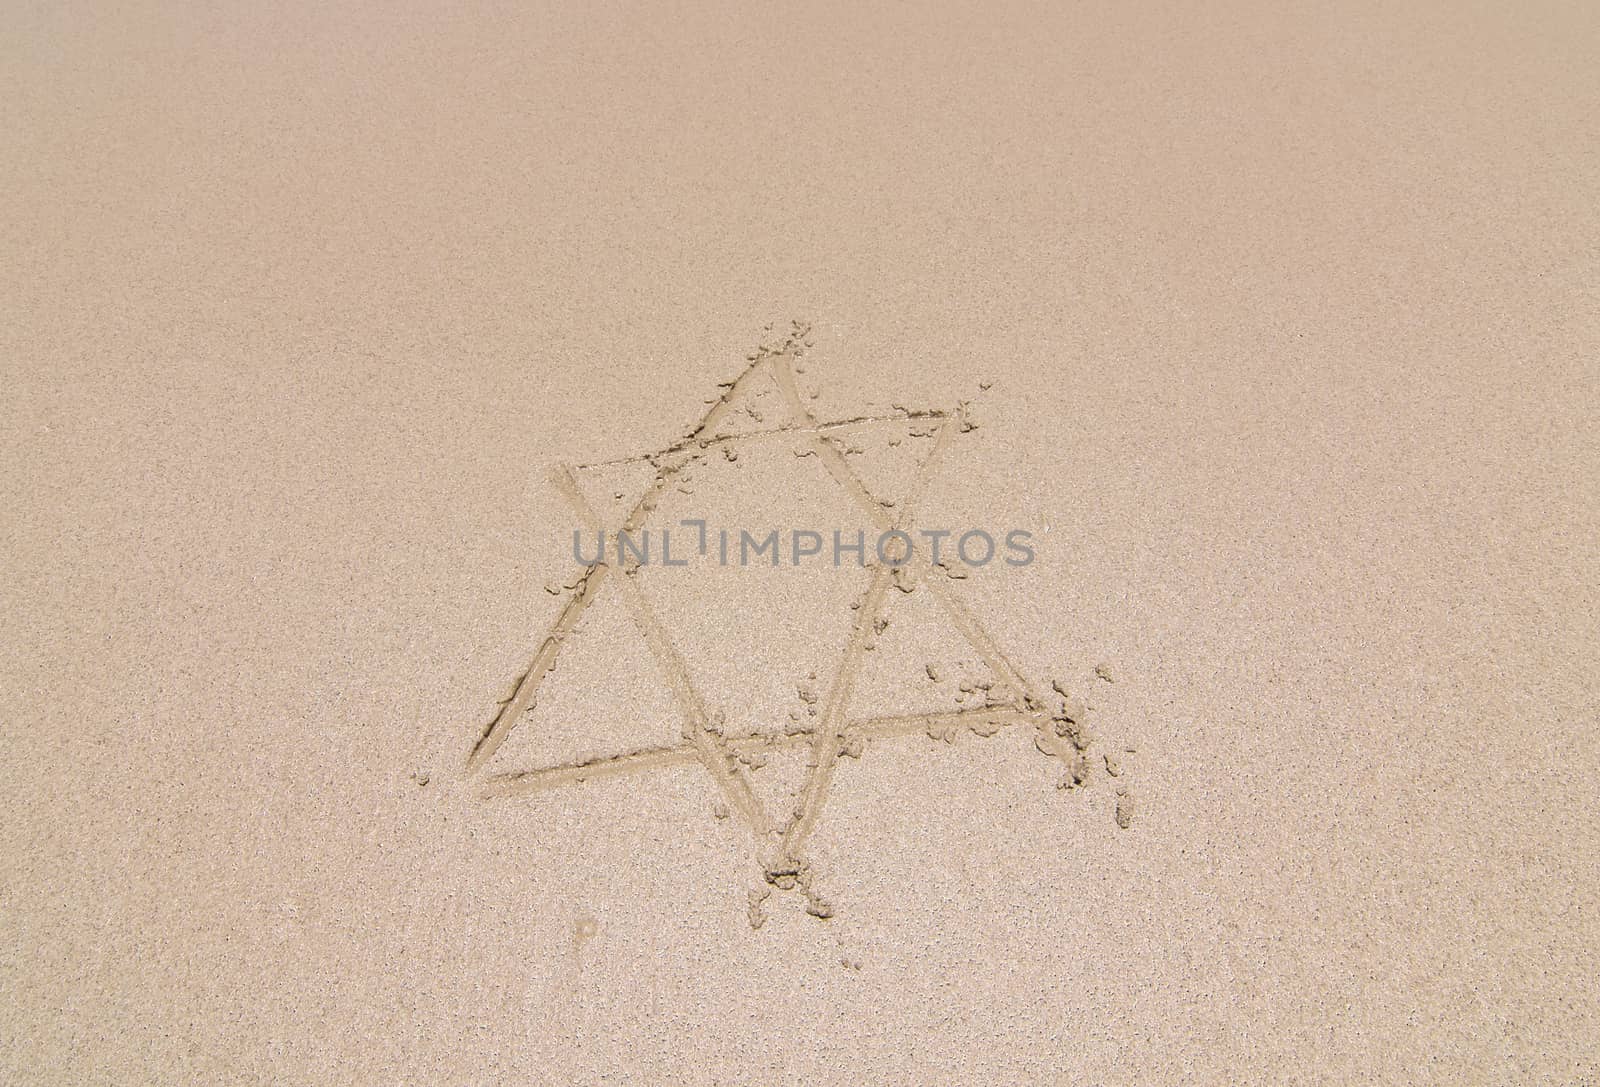 Draw a star background on the sand